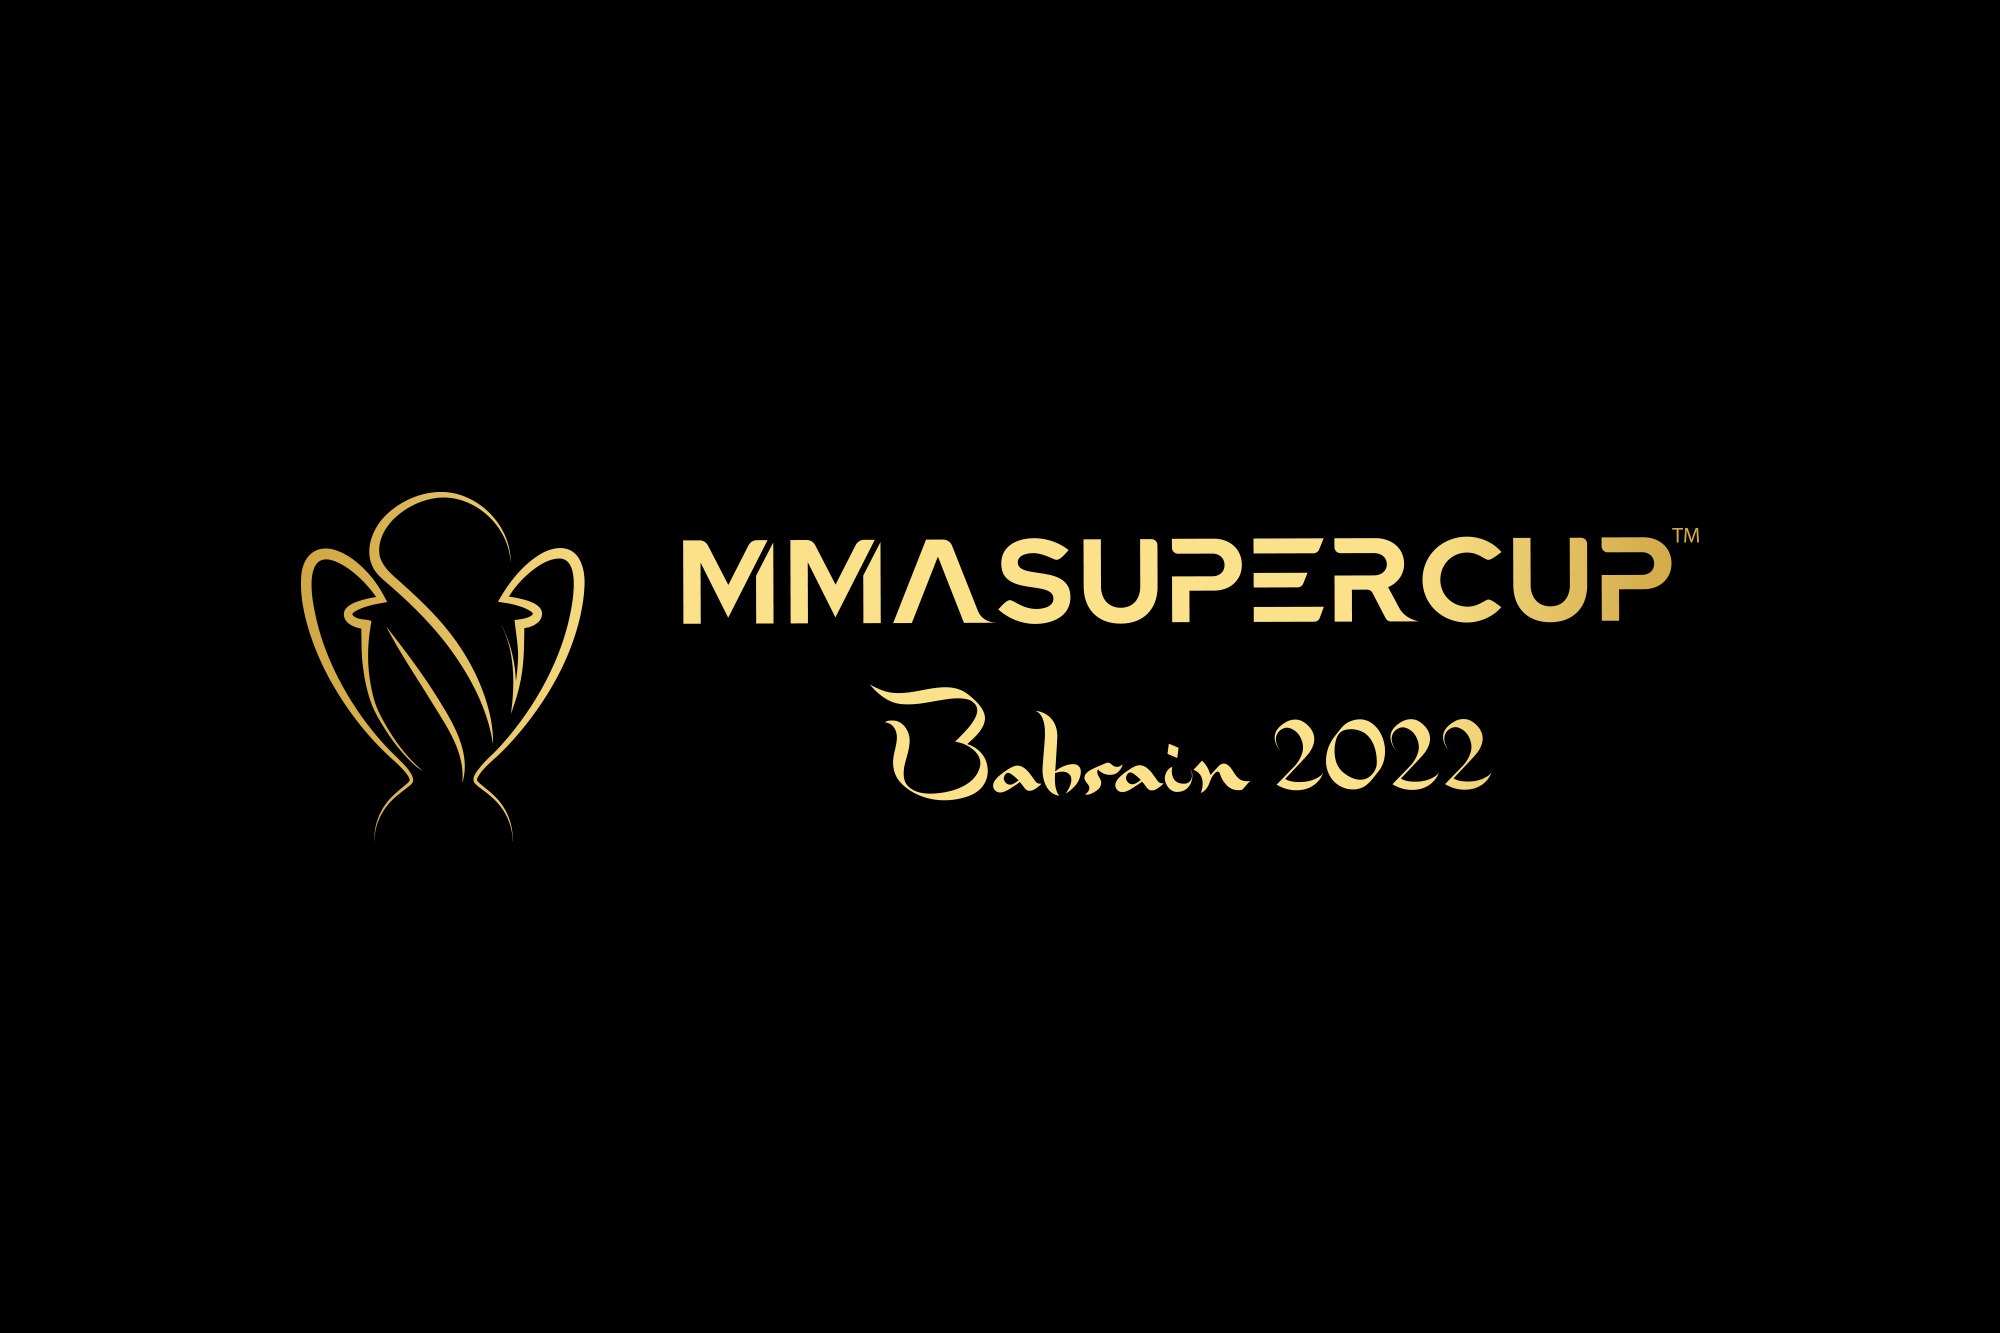 Watch MMA SuperCup on IMMAF TV